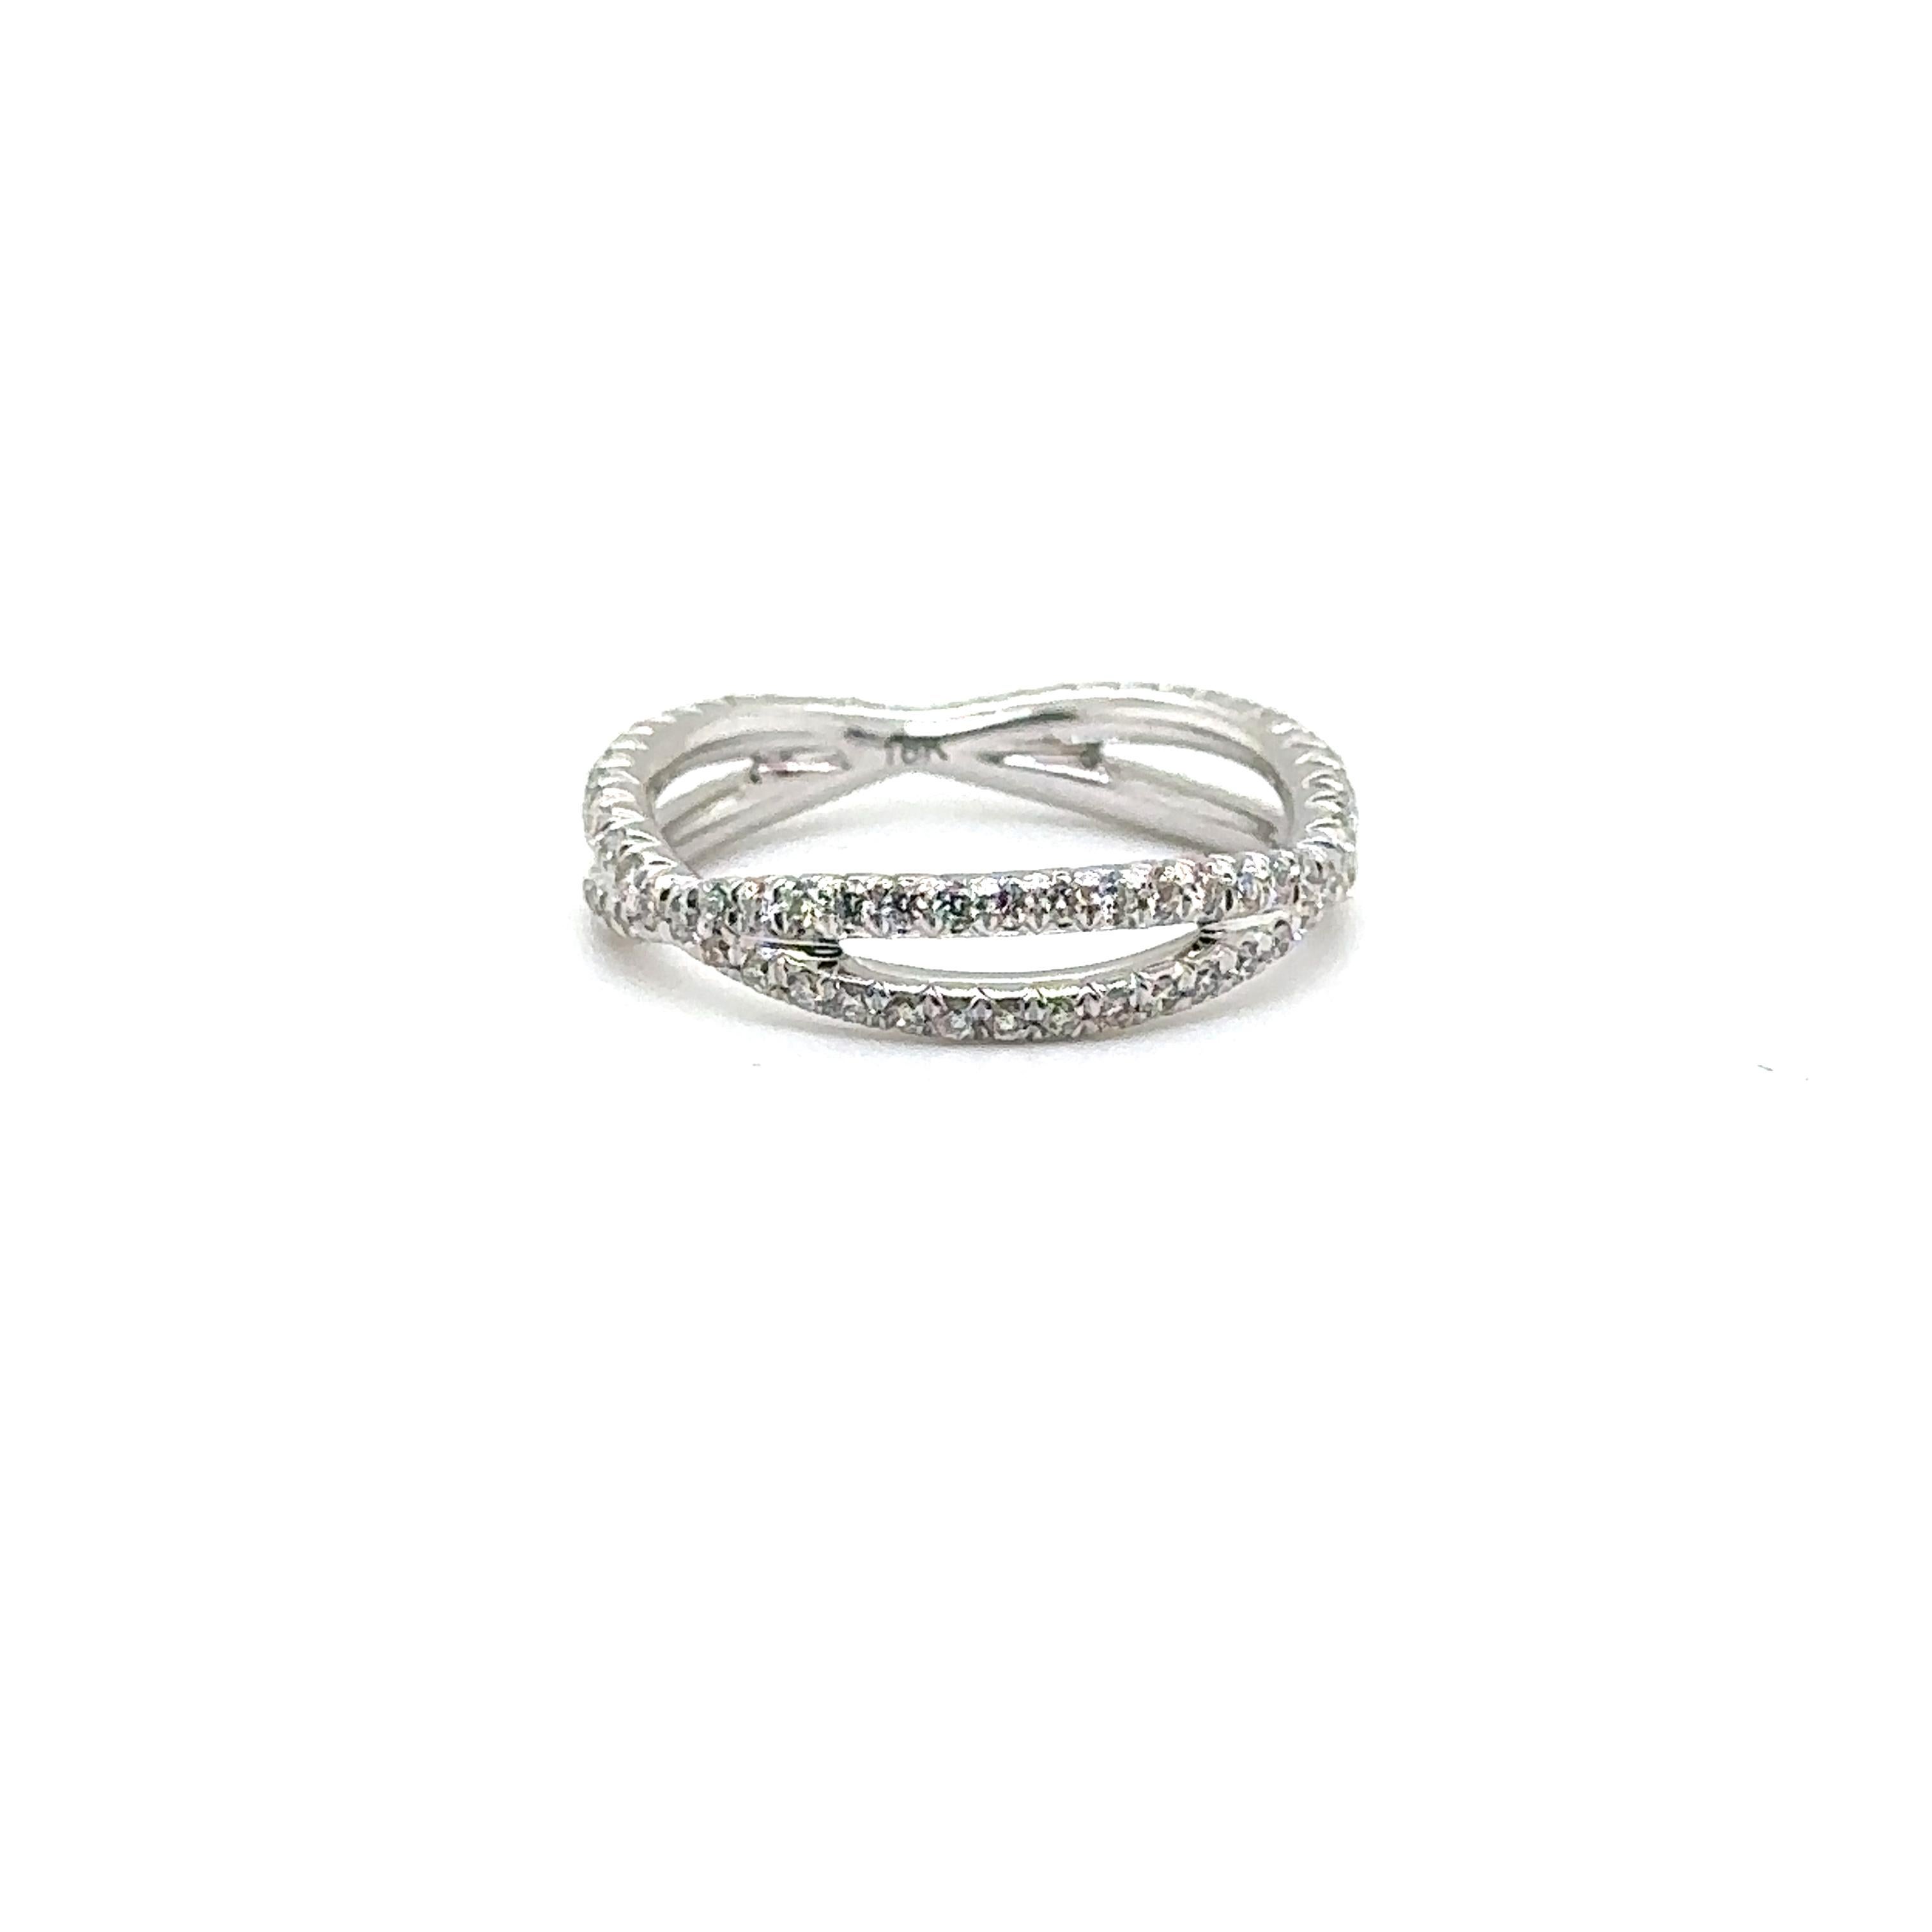 18K WHITE GOLD RING with DIAMONDS 
Metal: 18K White Gold
Diamond Info: 
90 – H/VS ROUND BRILLIANT DIAMONDS
SETTING MICRO PAVE CUT DOWN 
Total Ct Weight: 0.63 cwt.
Item Weight: 2.88 gm
Ring Size: 5 (Can be sized up to 5 ¼)
Measurements:  4.25 mm